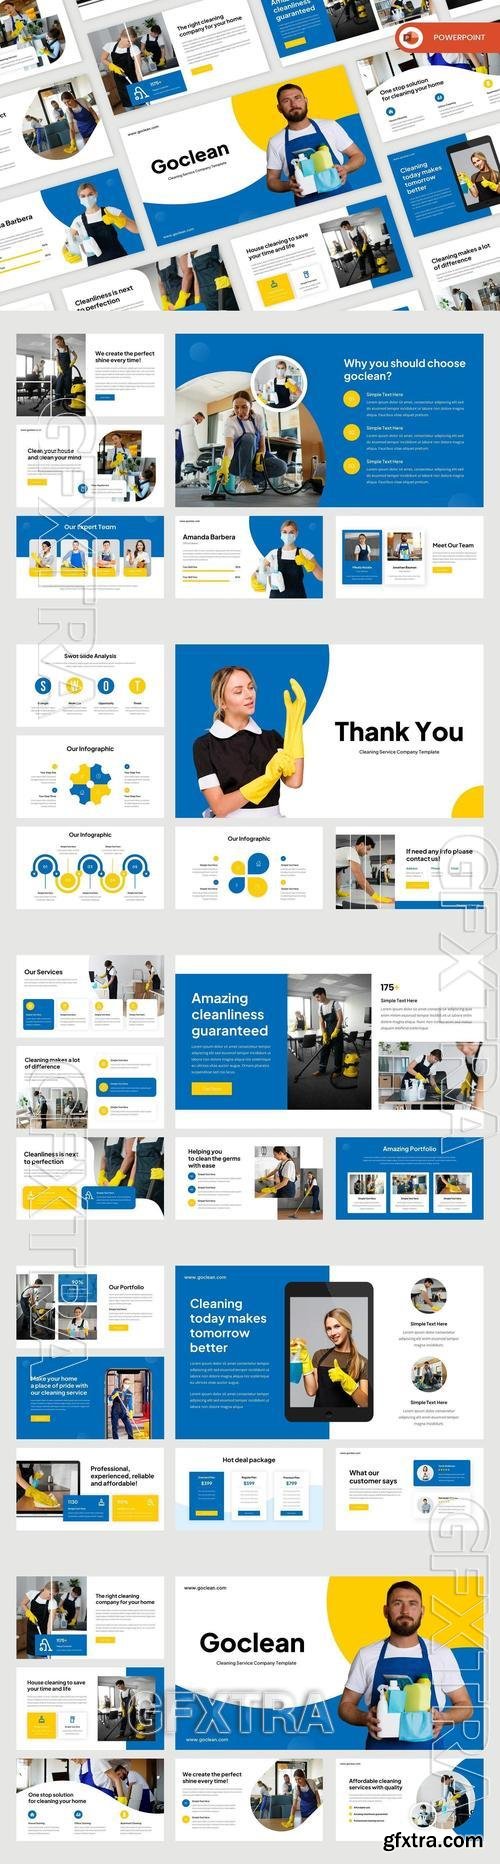 Goclean - Cleaning Service PowerPoint Template C4JUE4T